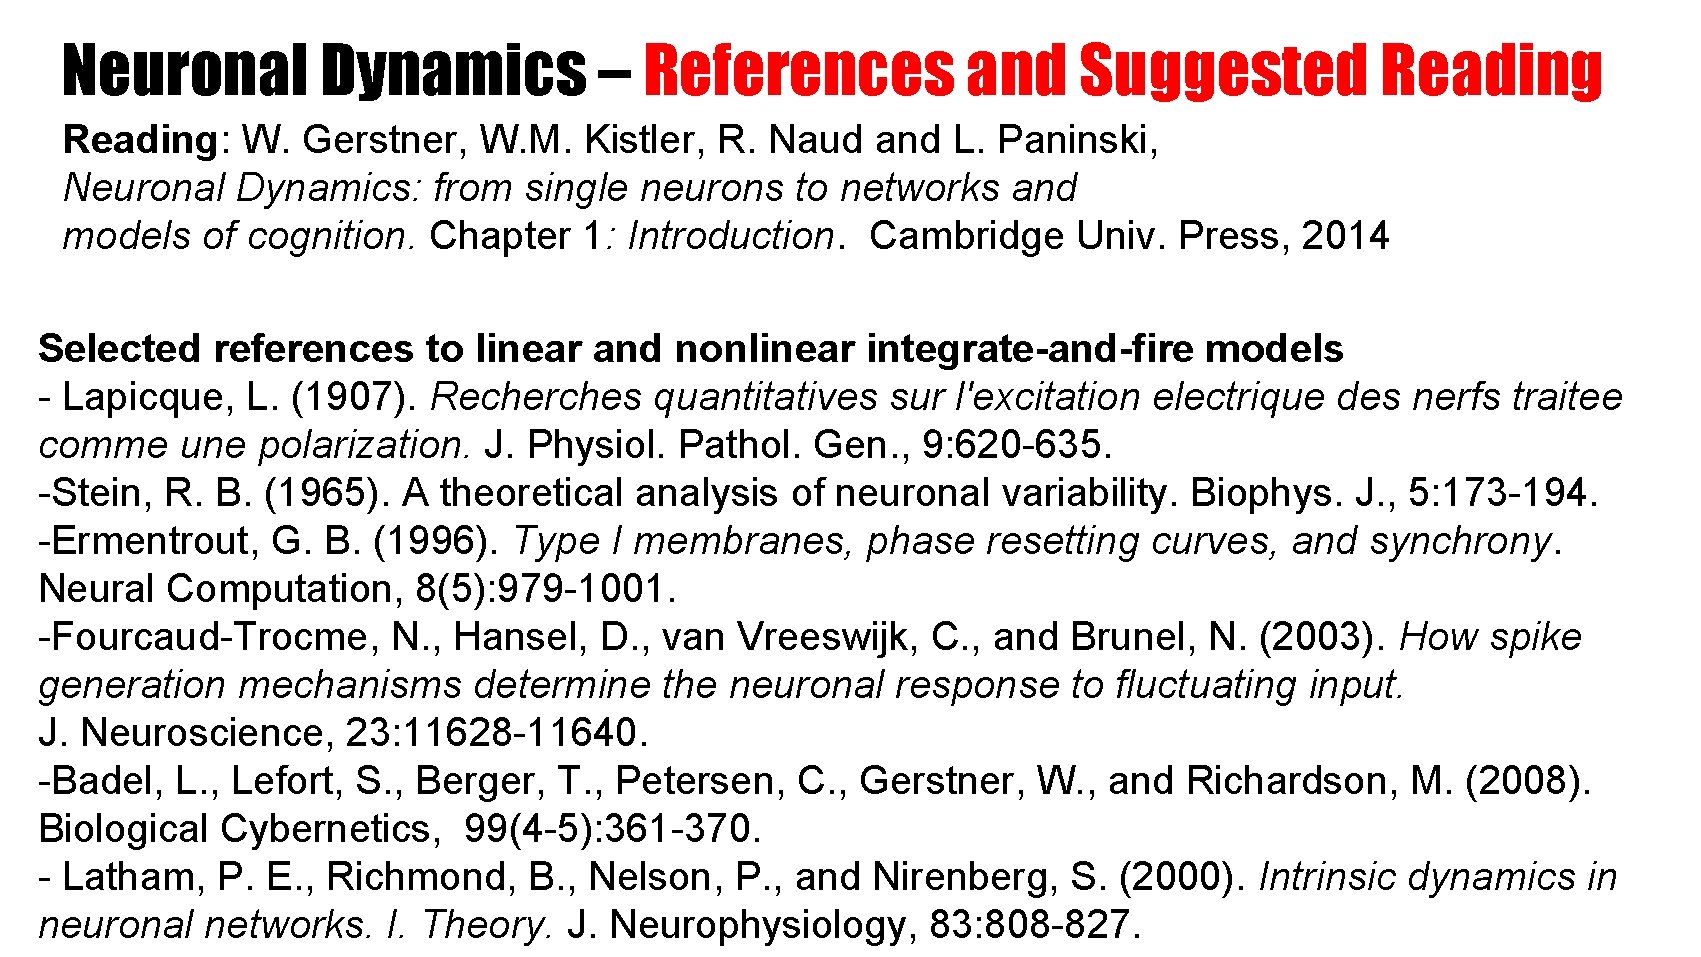 Neuronal Dynamics – References and Suggested Reading: W. Gerstner, W. M. Kistler, R. Naud